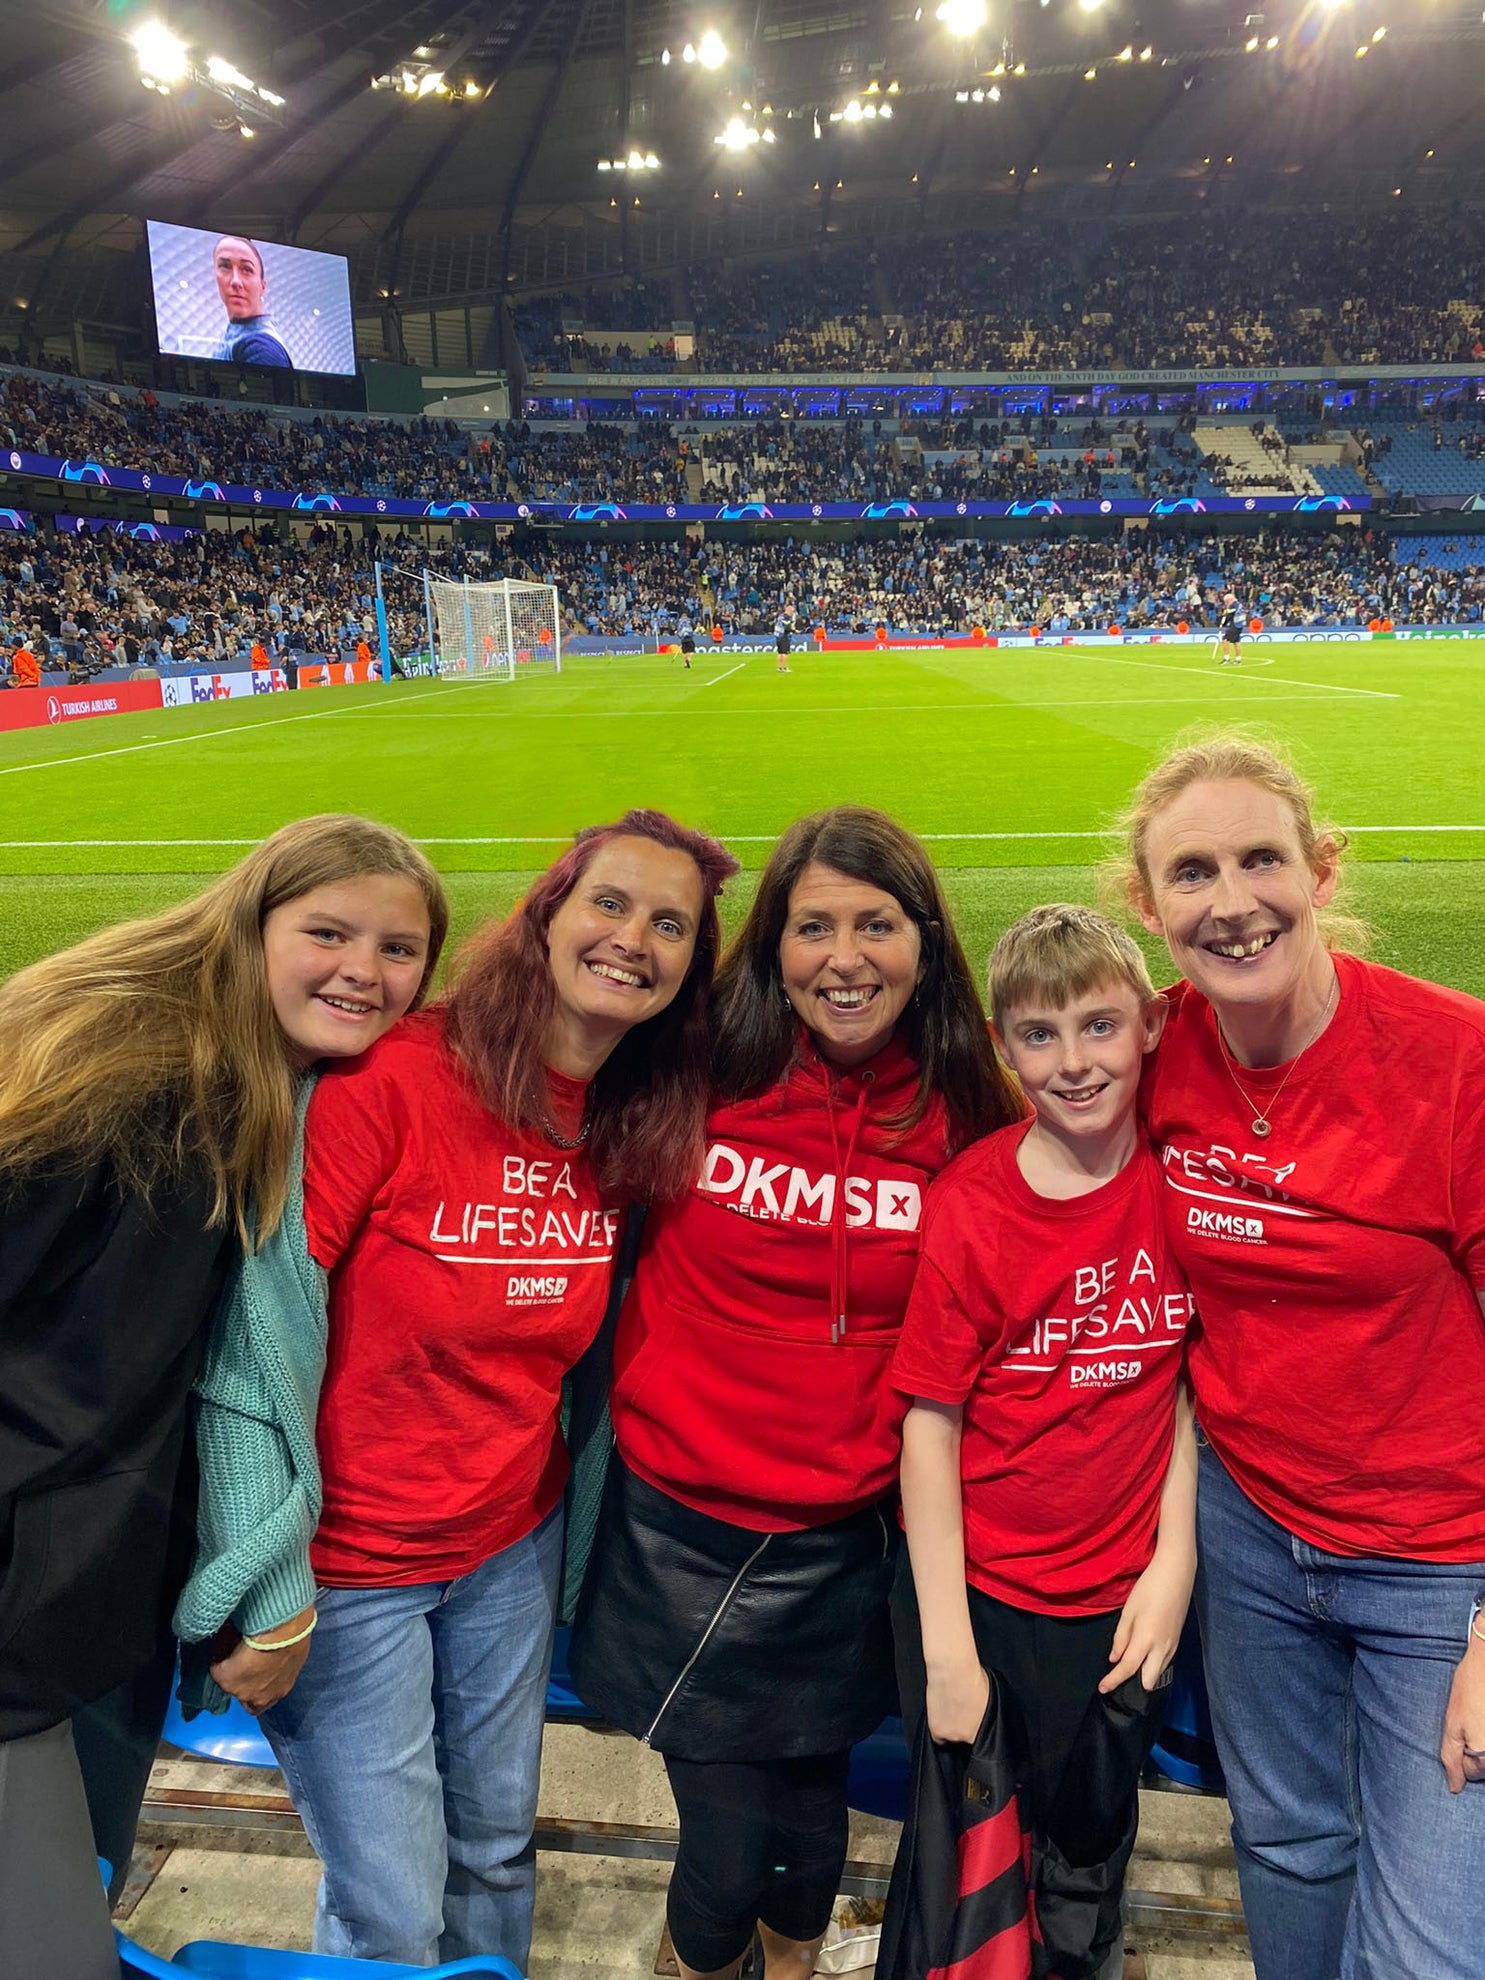 DKMS staff and volunteers at the Manchester City ground